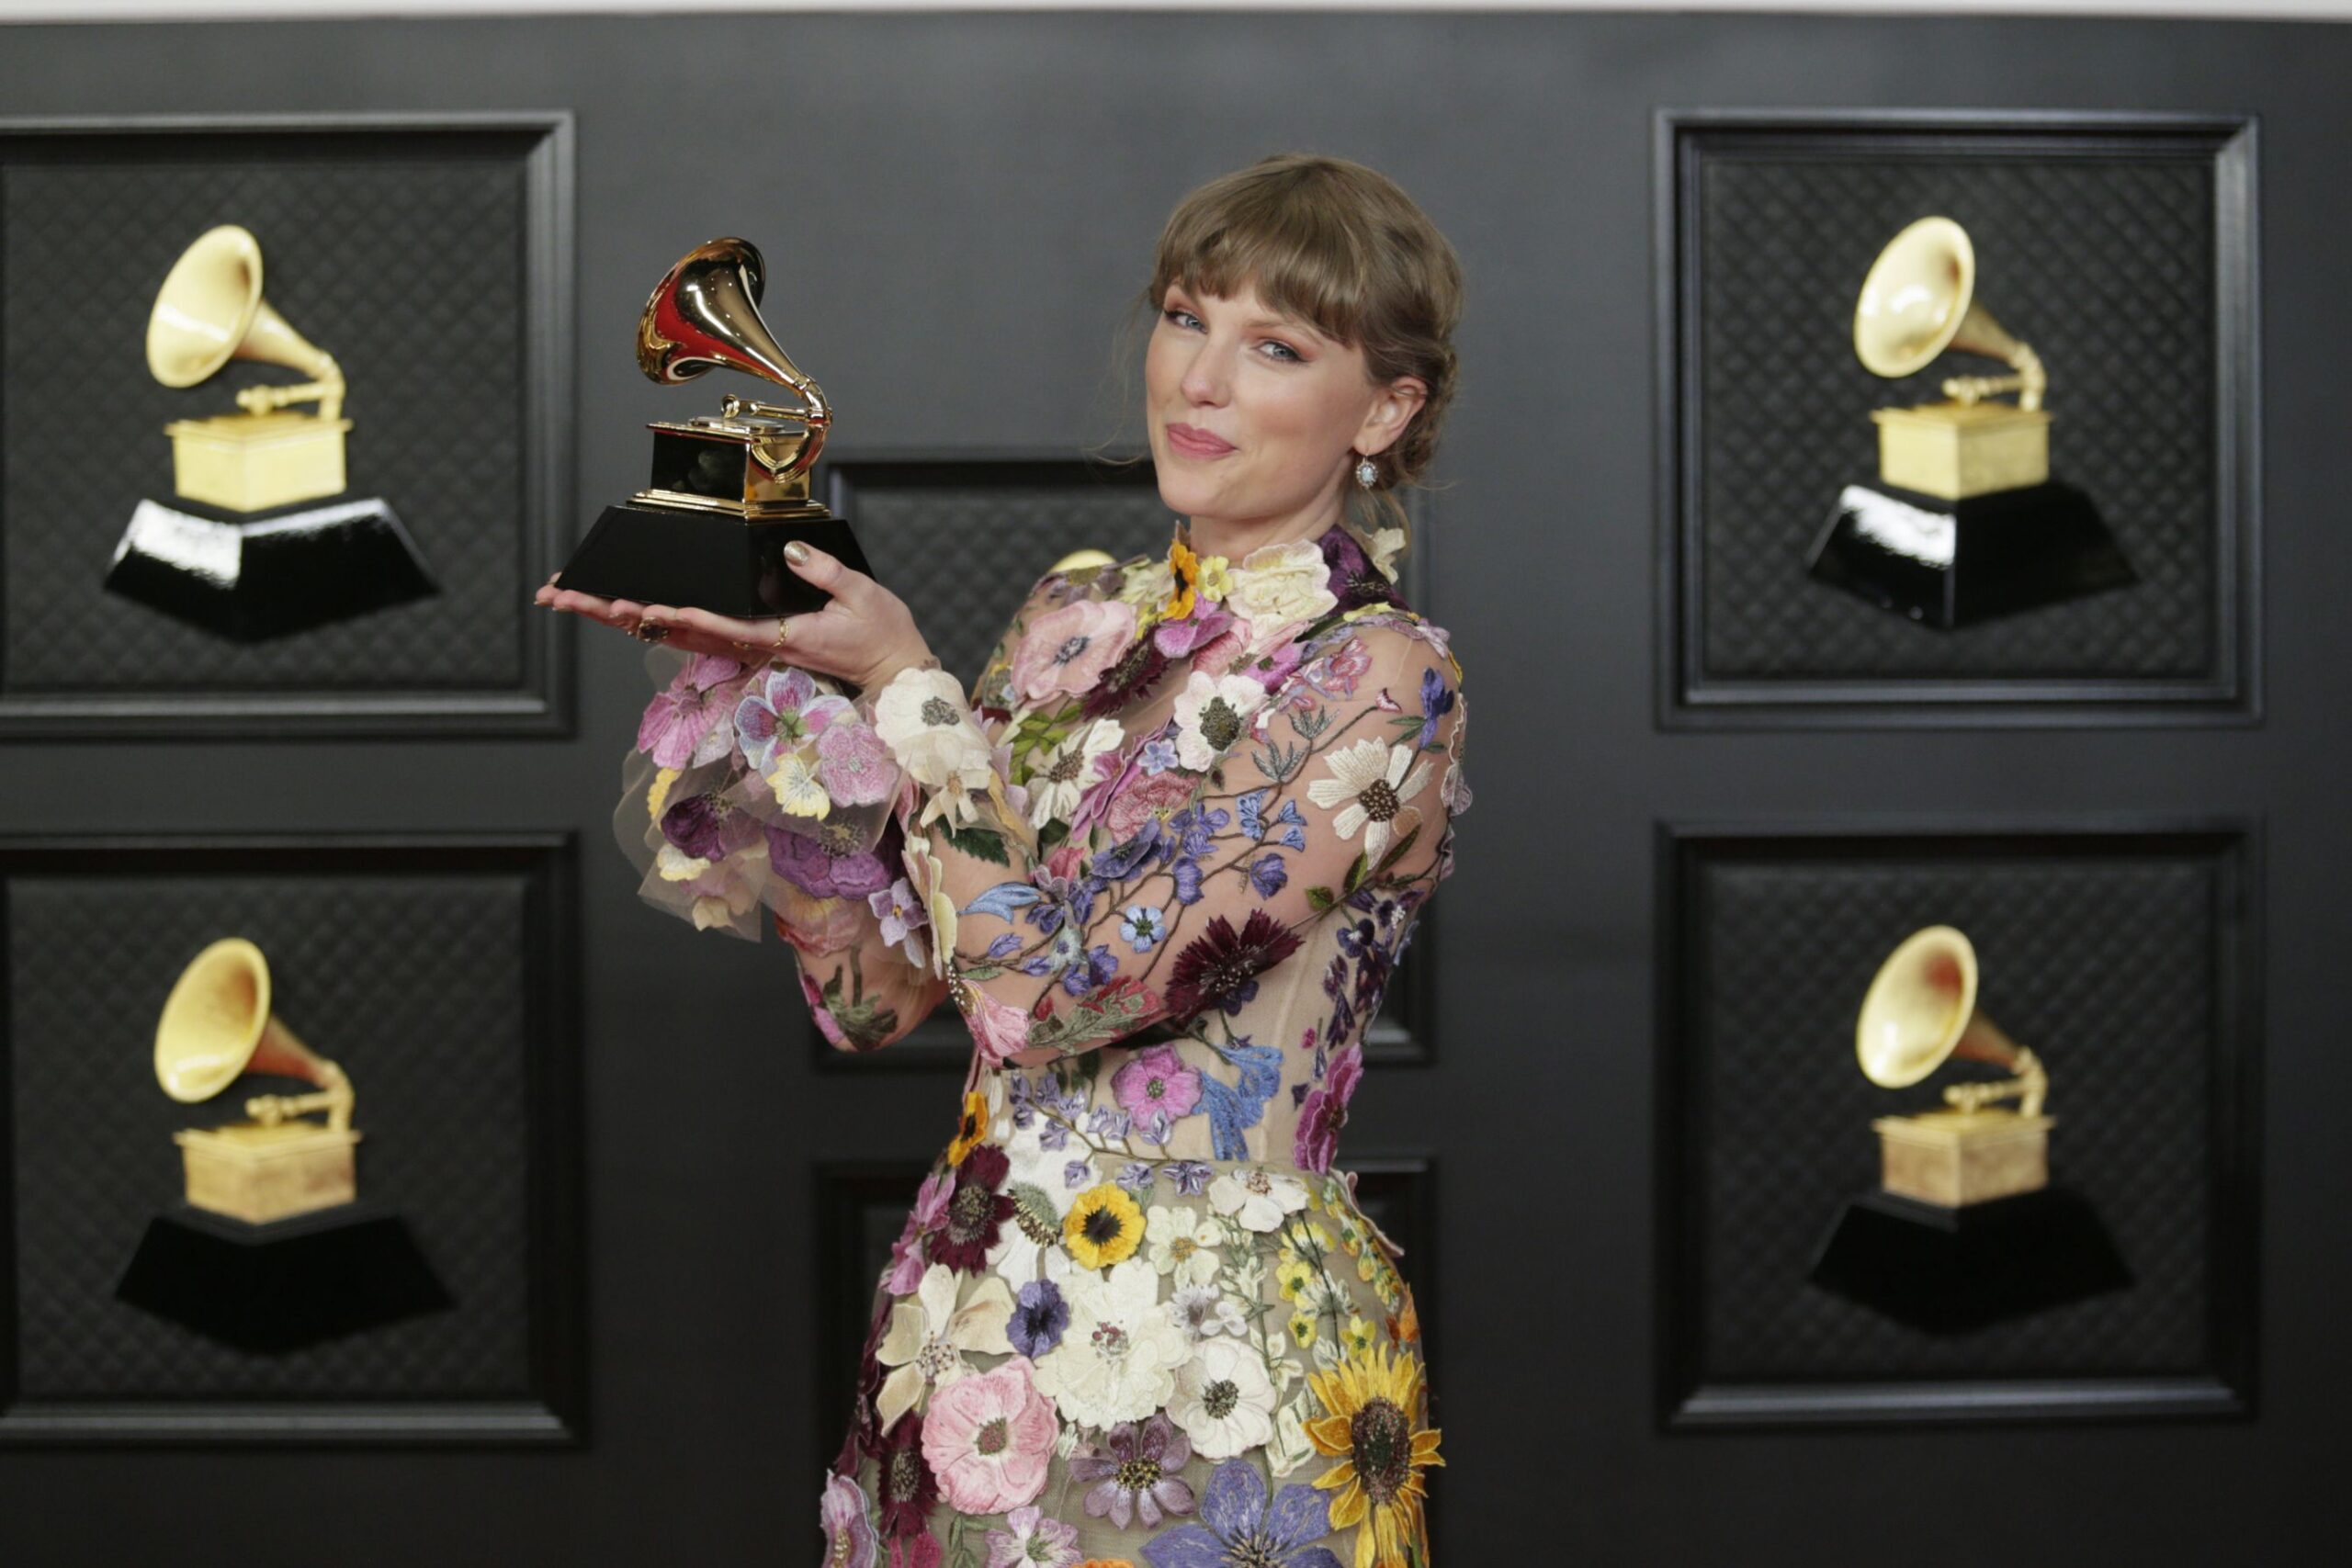 taylor swift at the 63rd annual grammy awards broadcast news photo 1706010778 scaled